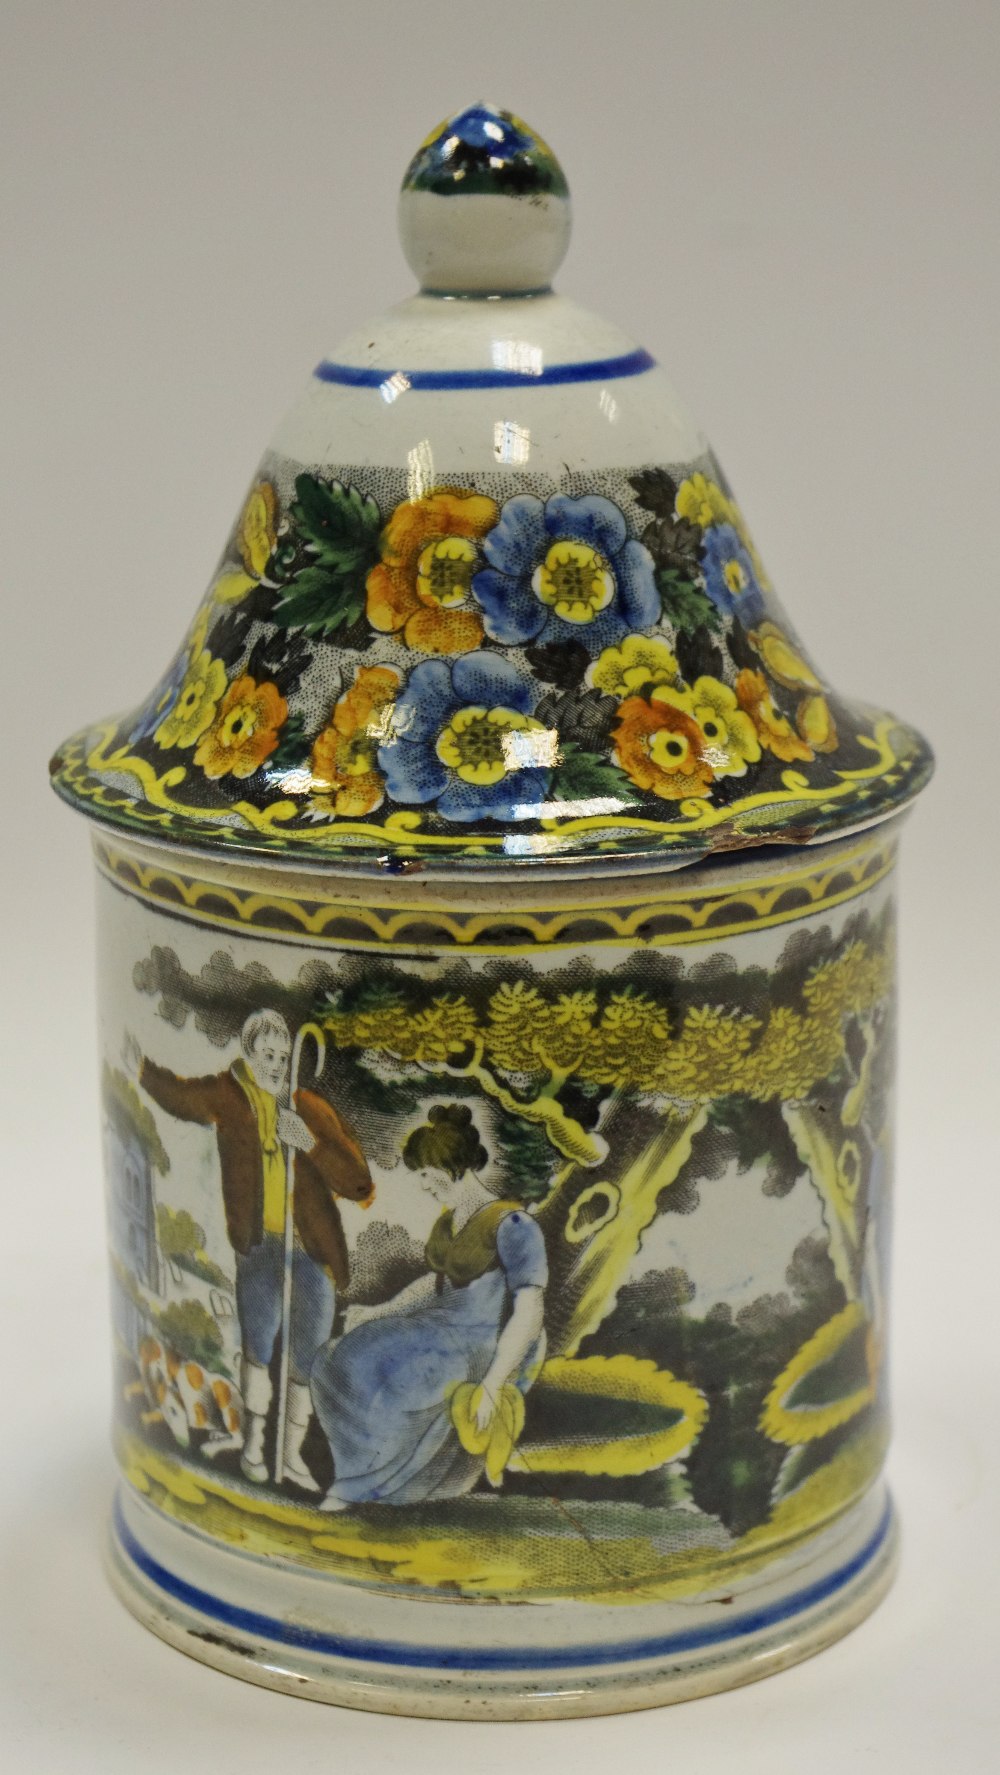 An 18th century Pearlware tobacco jar and cover